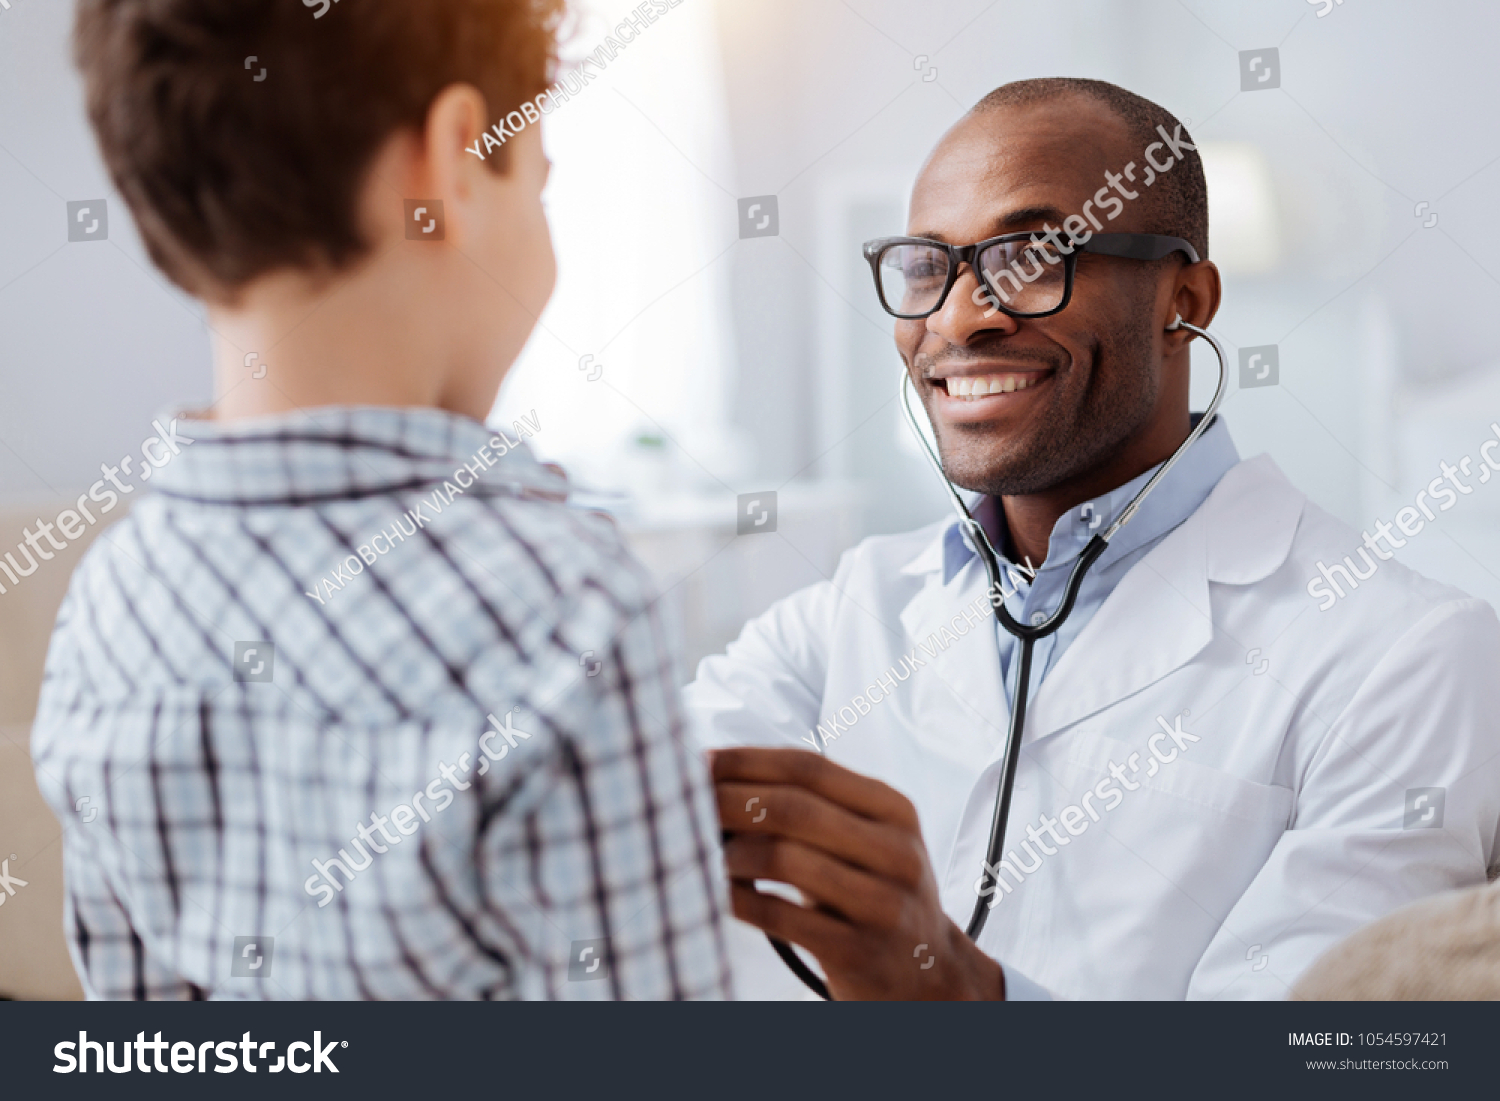 Stethoscope exam. Attractive cheerful male doctor listening to boy while putting on glasses and using stethoscope #1054597421